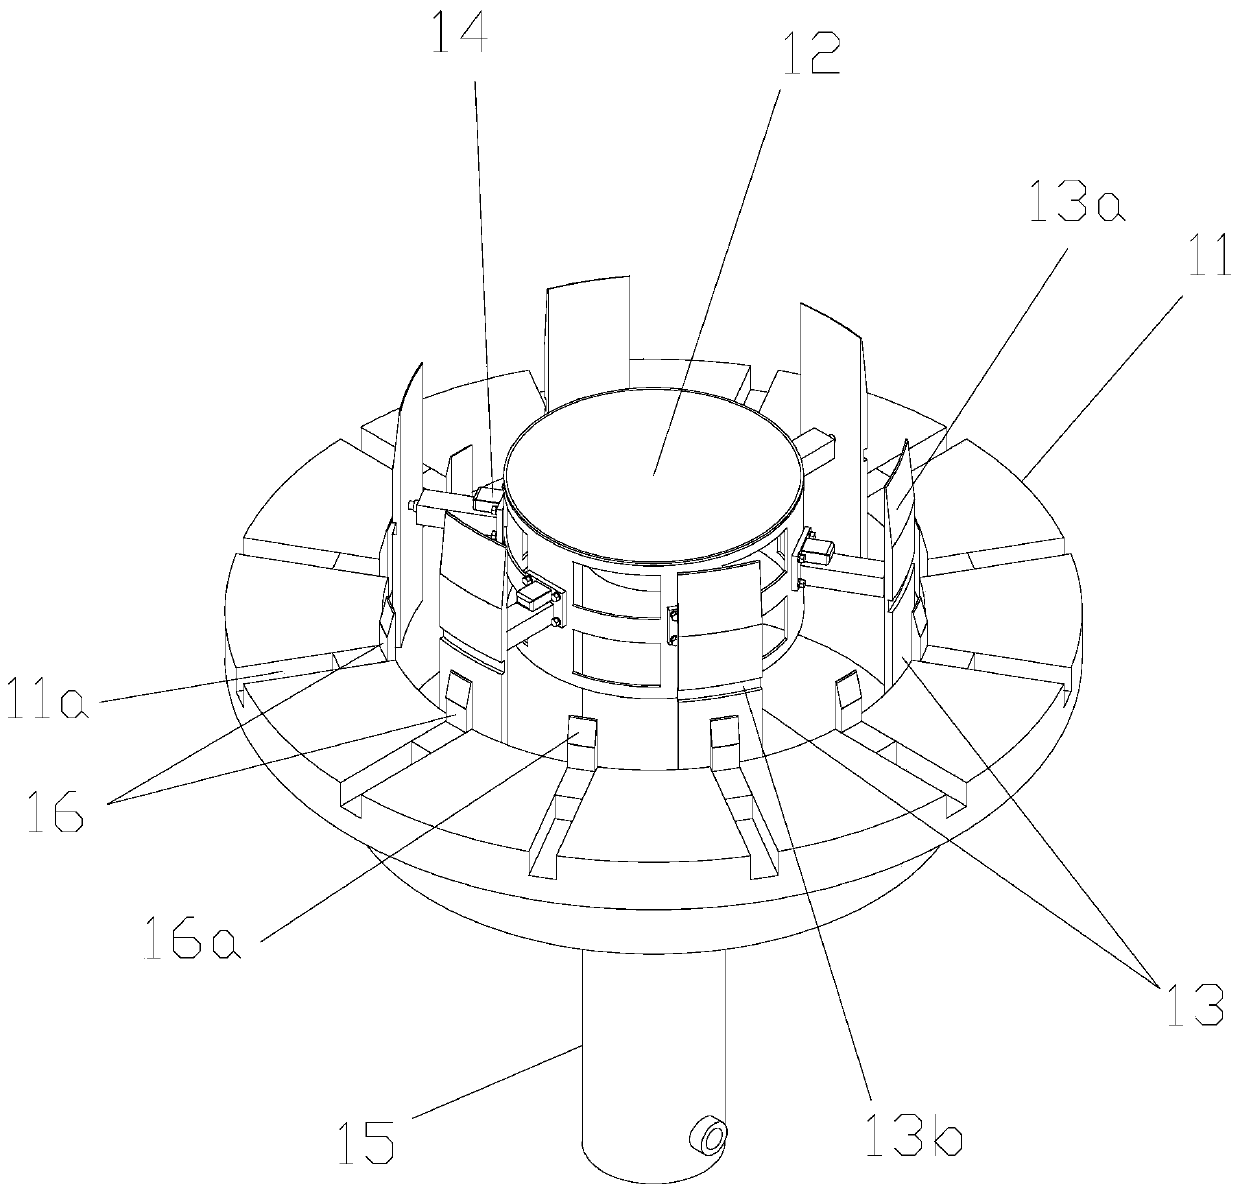 Thin-walled barrel welding assisting tool